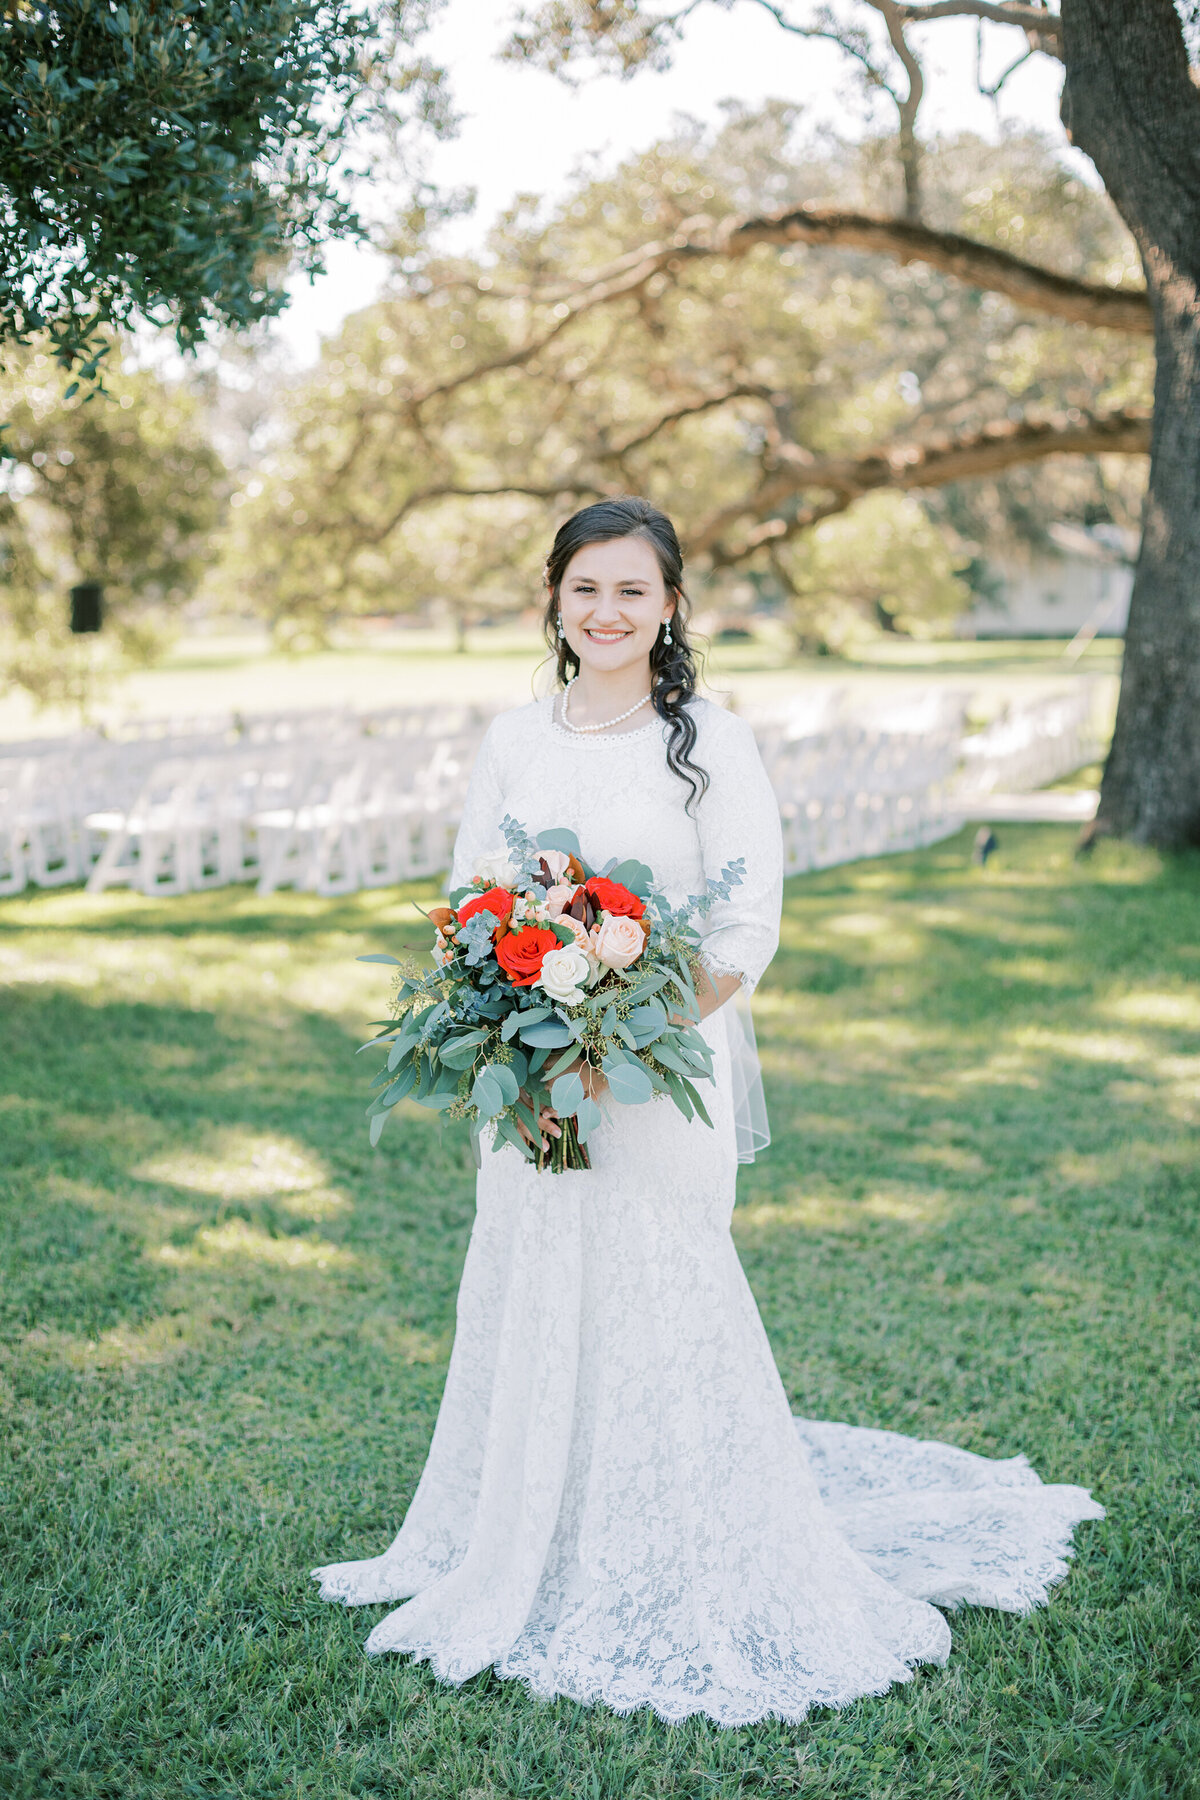 Ink & Willow Photography - Wedding Photography Victoria TX - Glass Wedding - ink&willow-weddingparty-4